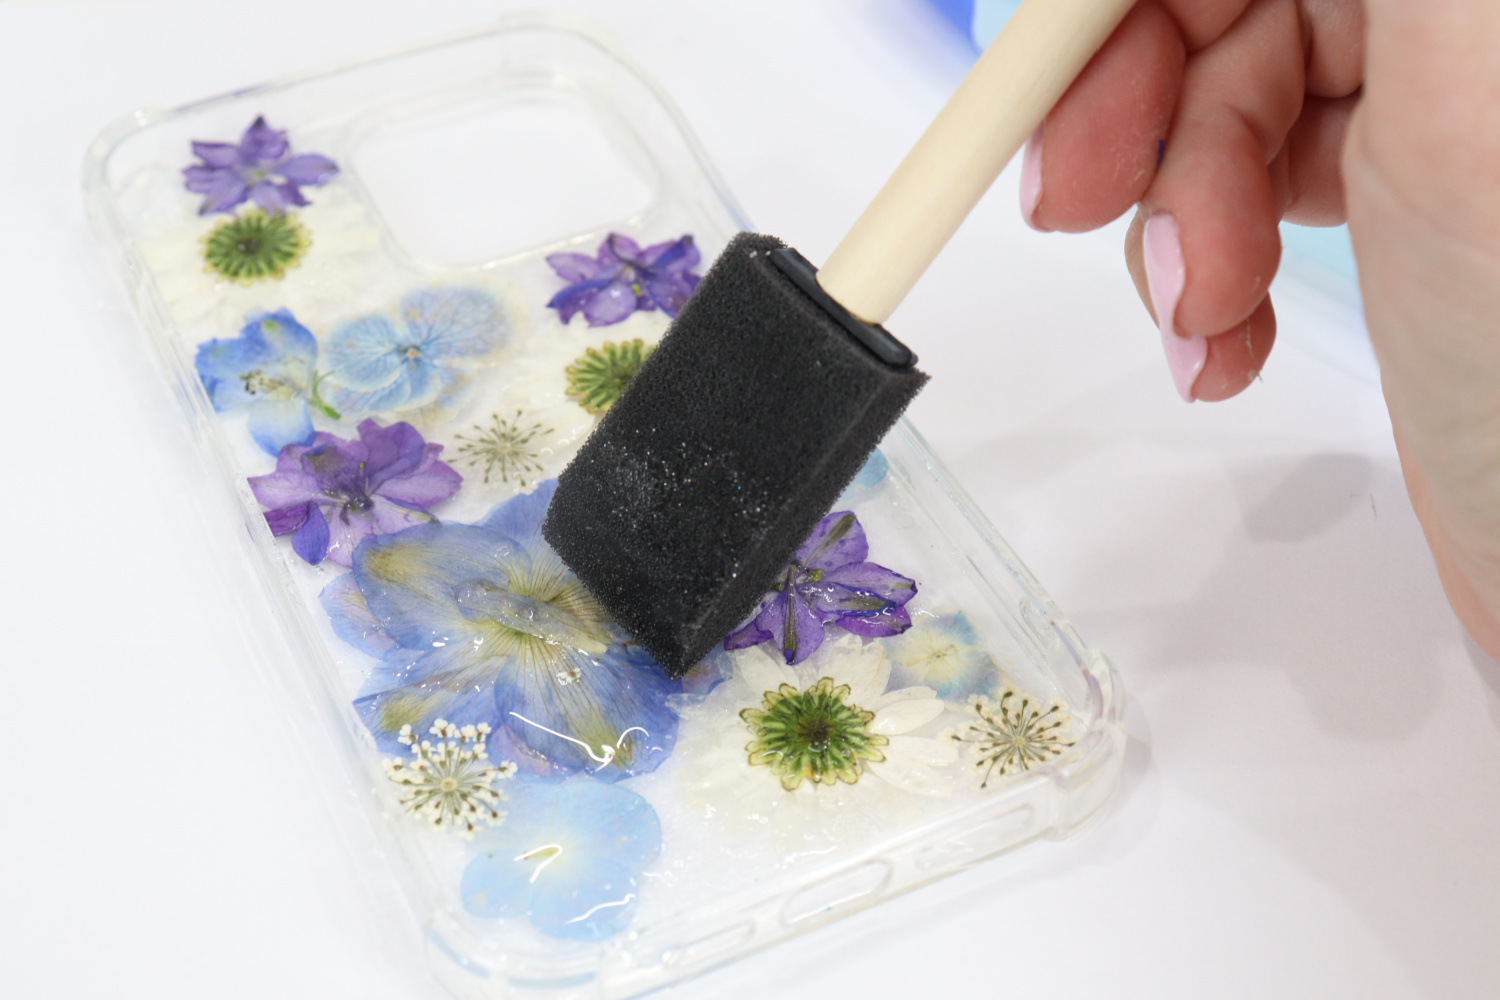 Image contains Amy’s hand using a sponge brush to apply a layer of clear glue on top of pressed flowers in a clear phone case.